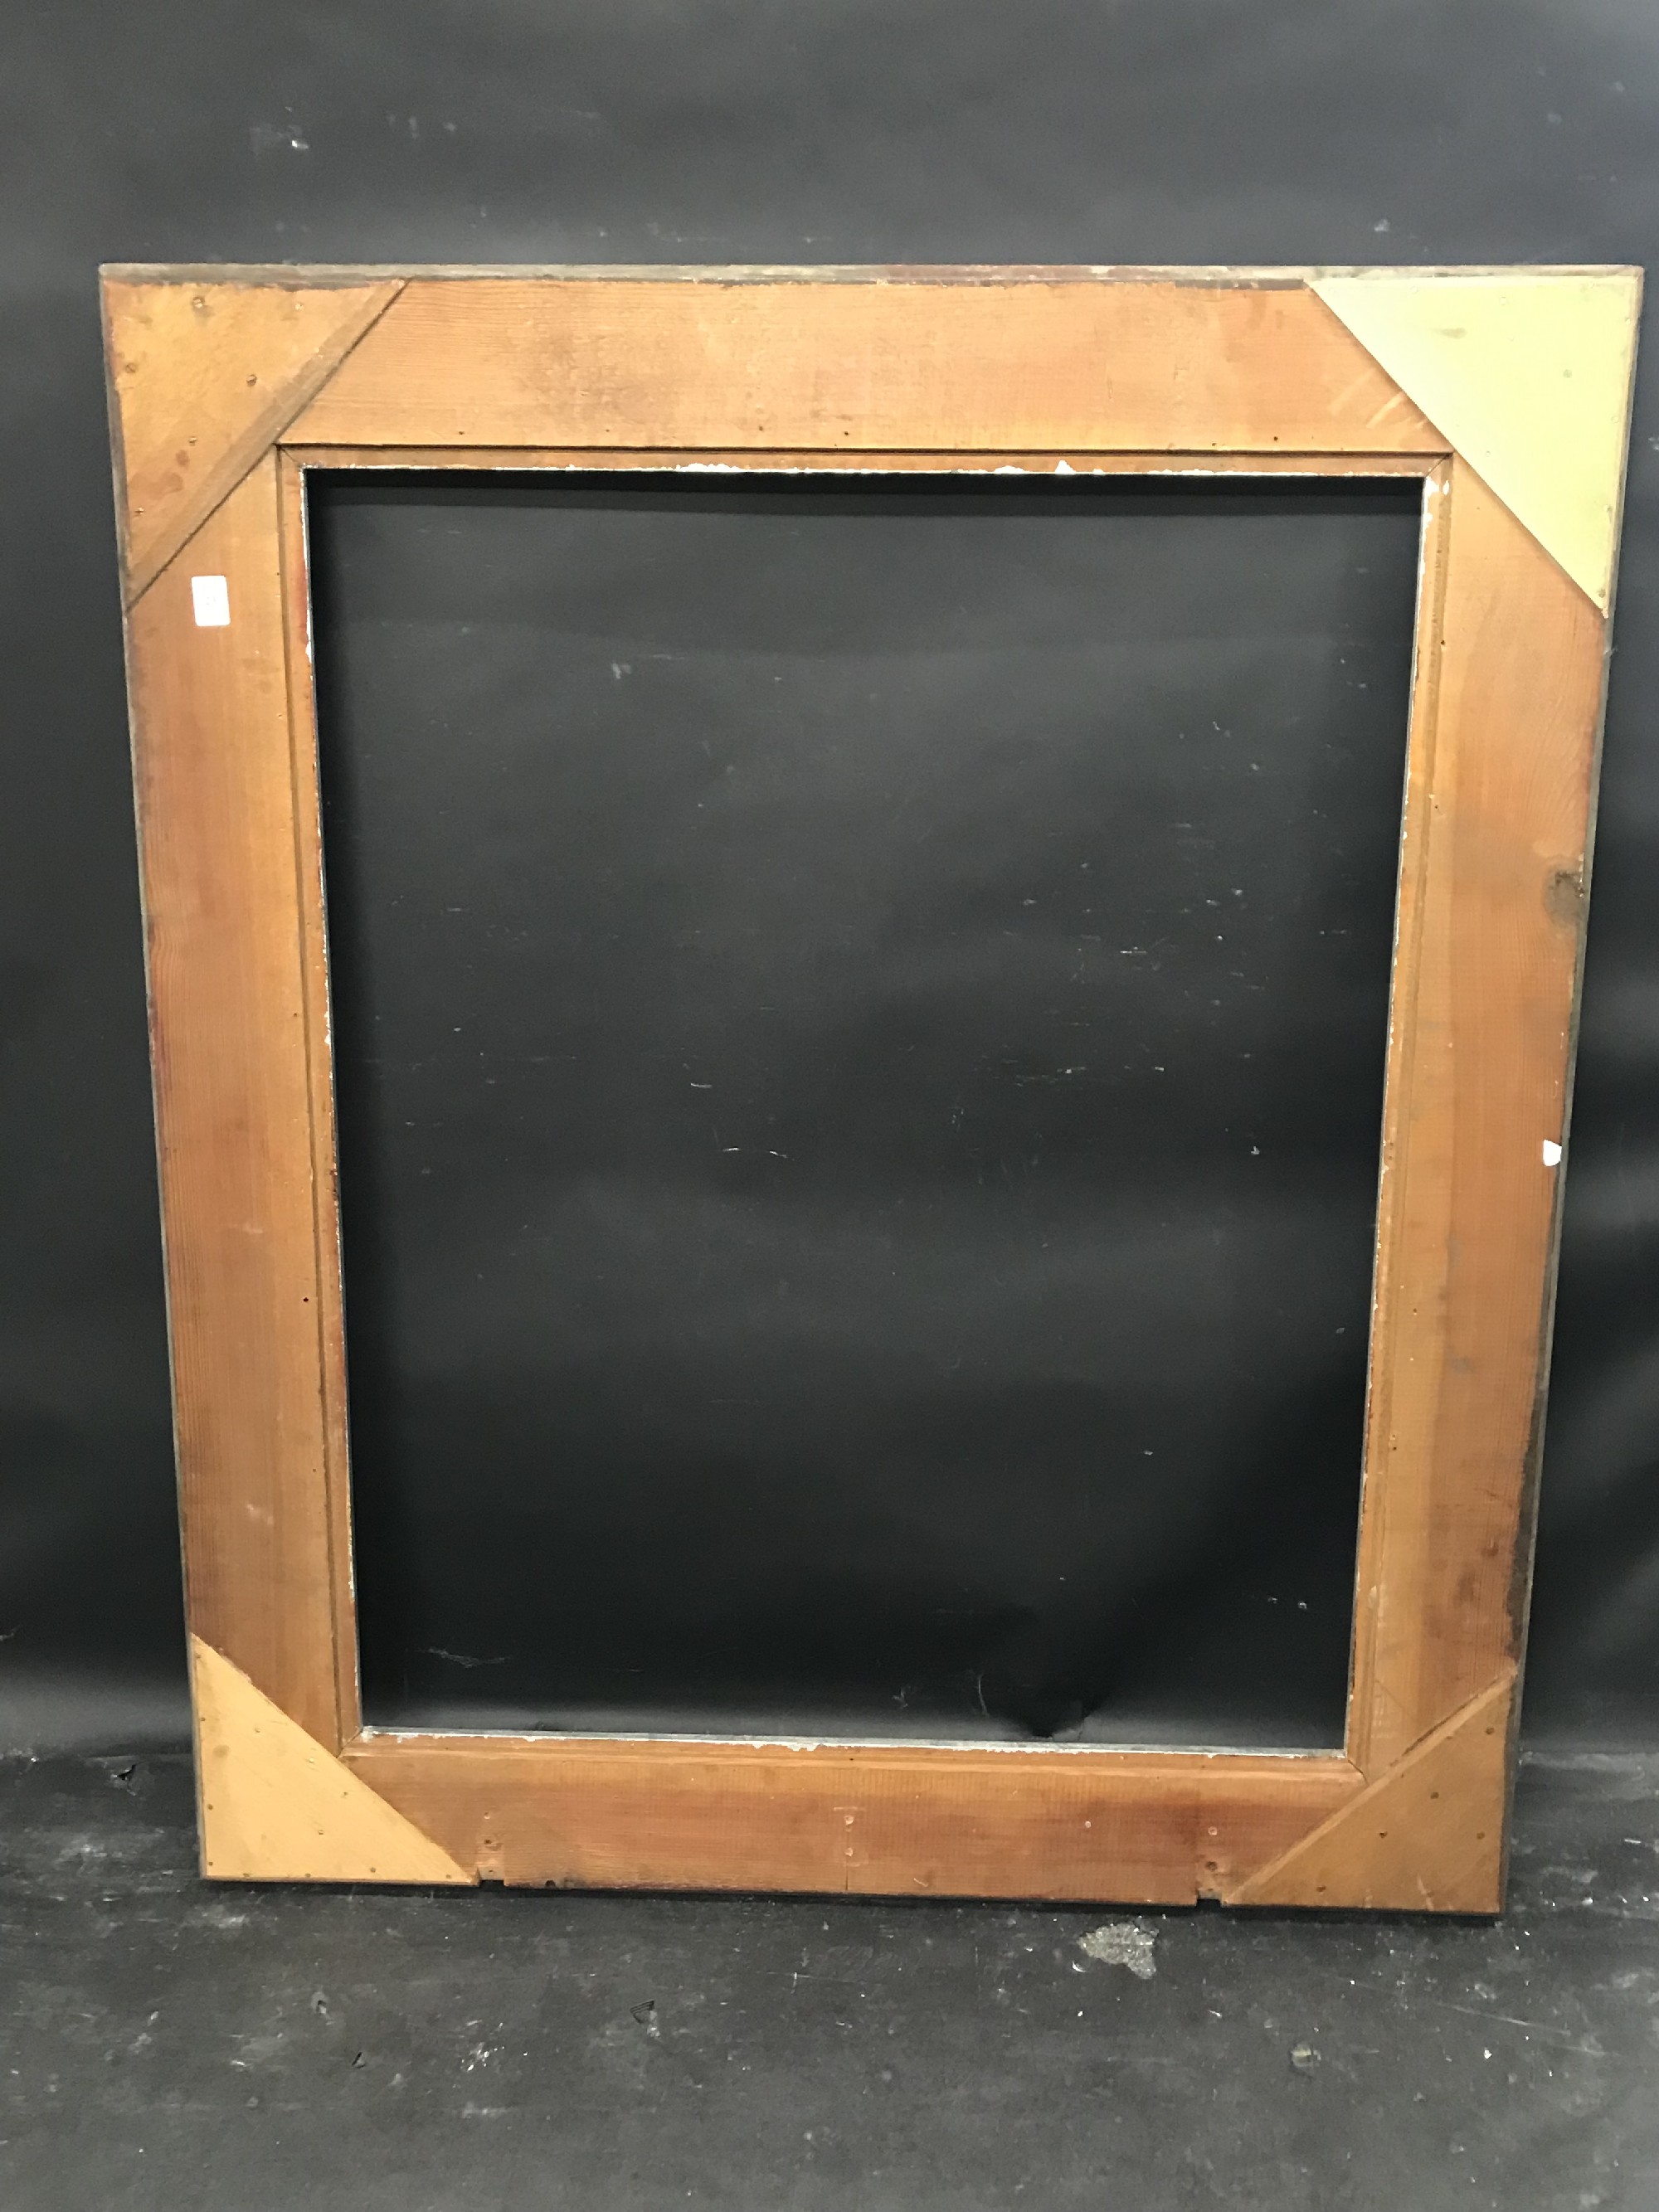 20th Century English School. A Painted Silver and Black Frame, 37" x 29.75". - Image 3 of 3